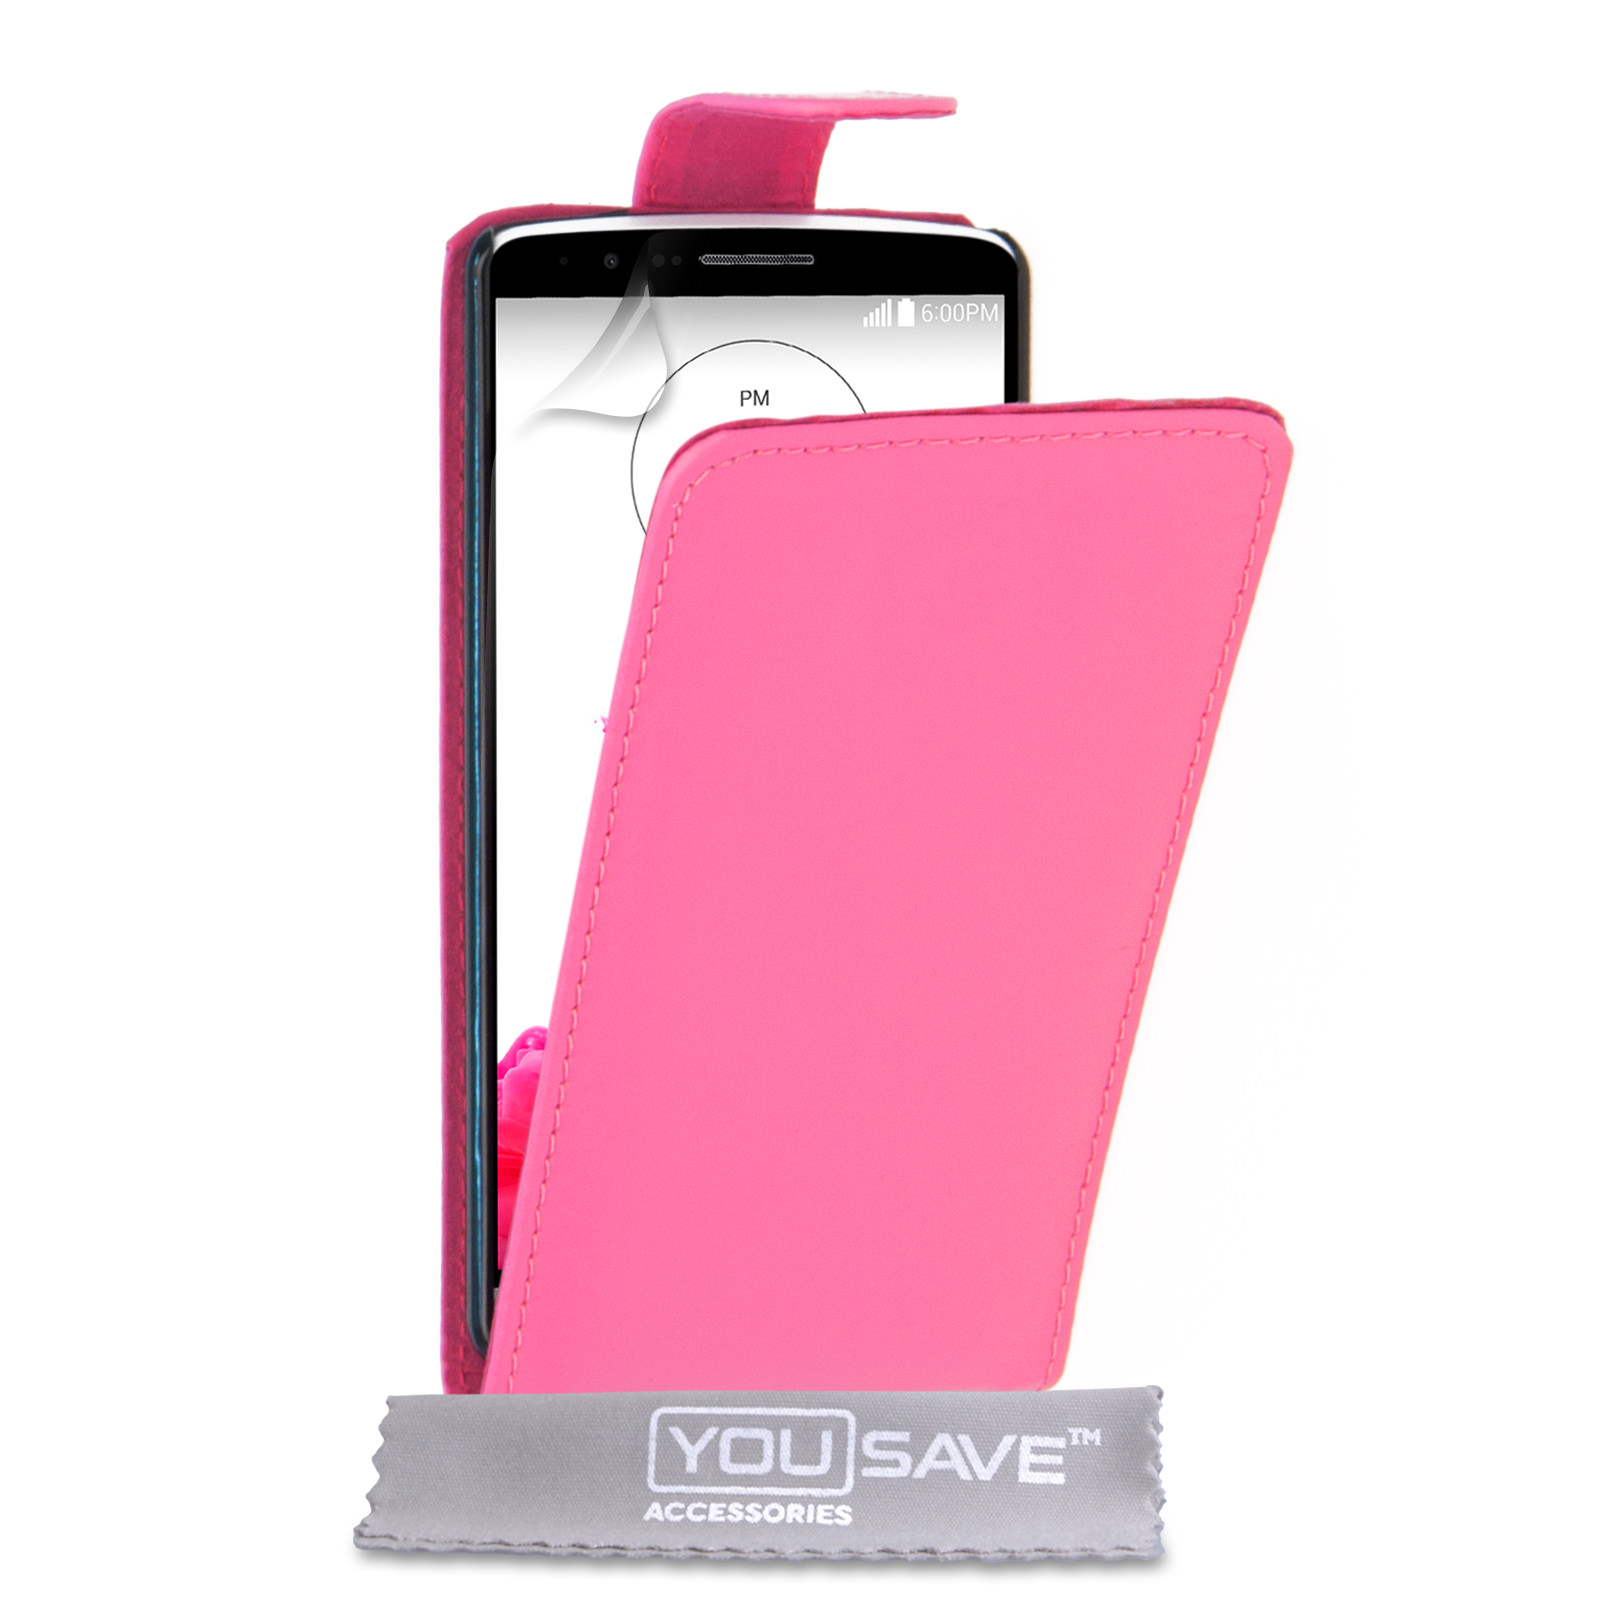 YouSave Accessories LG G3 Leather-Effect Flip Case - Hot Pink